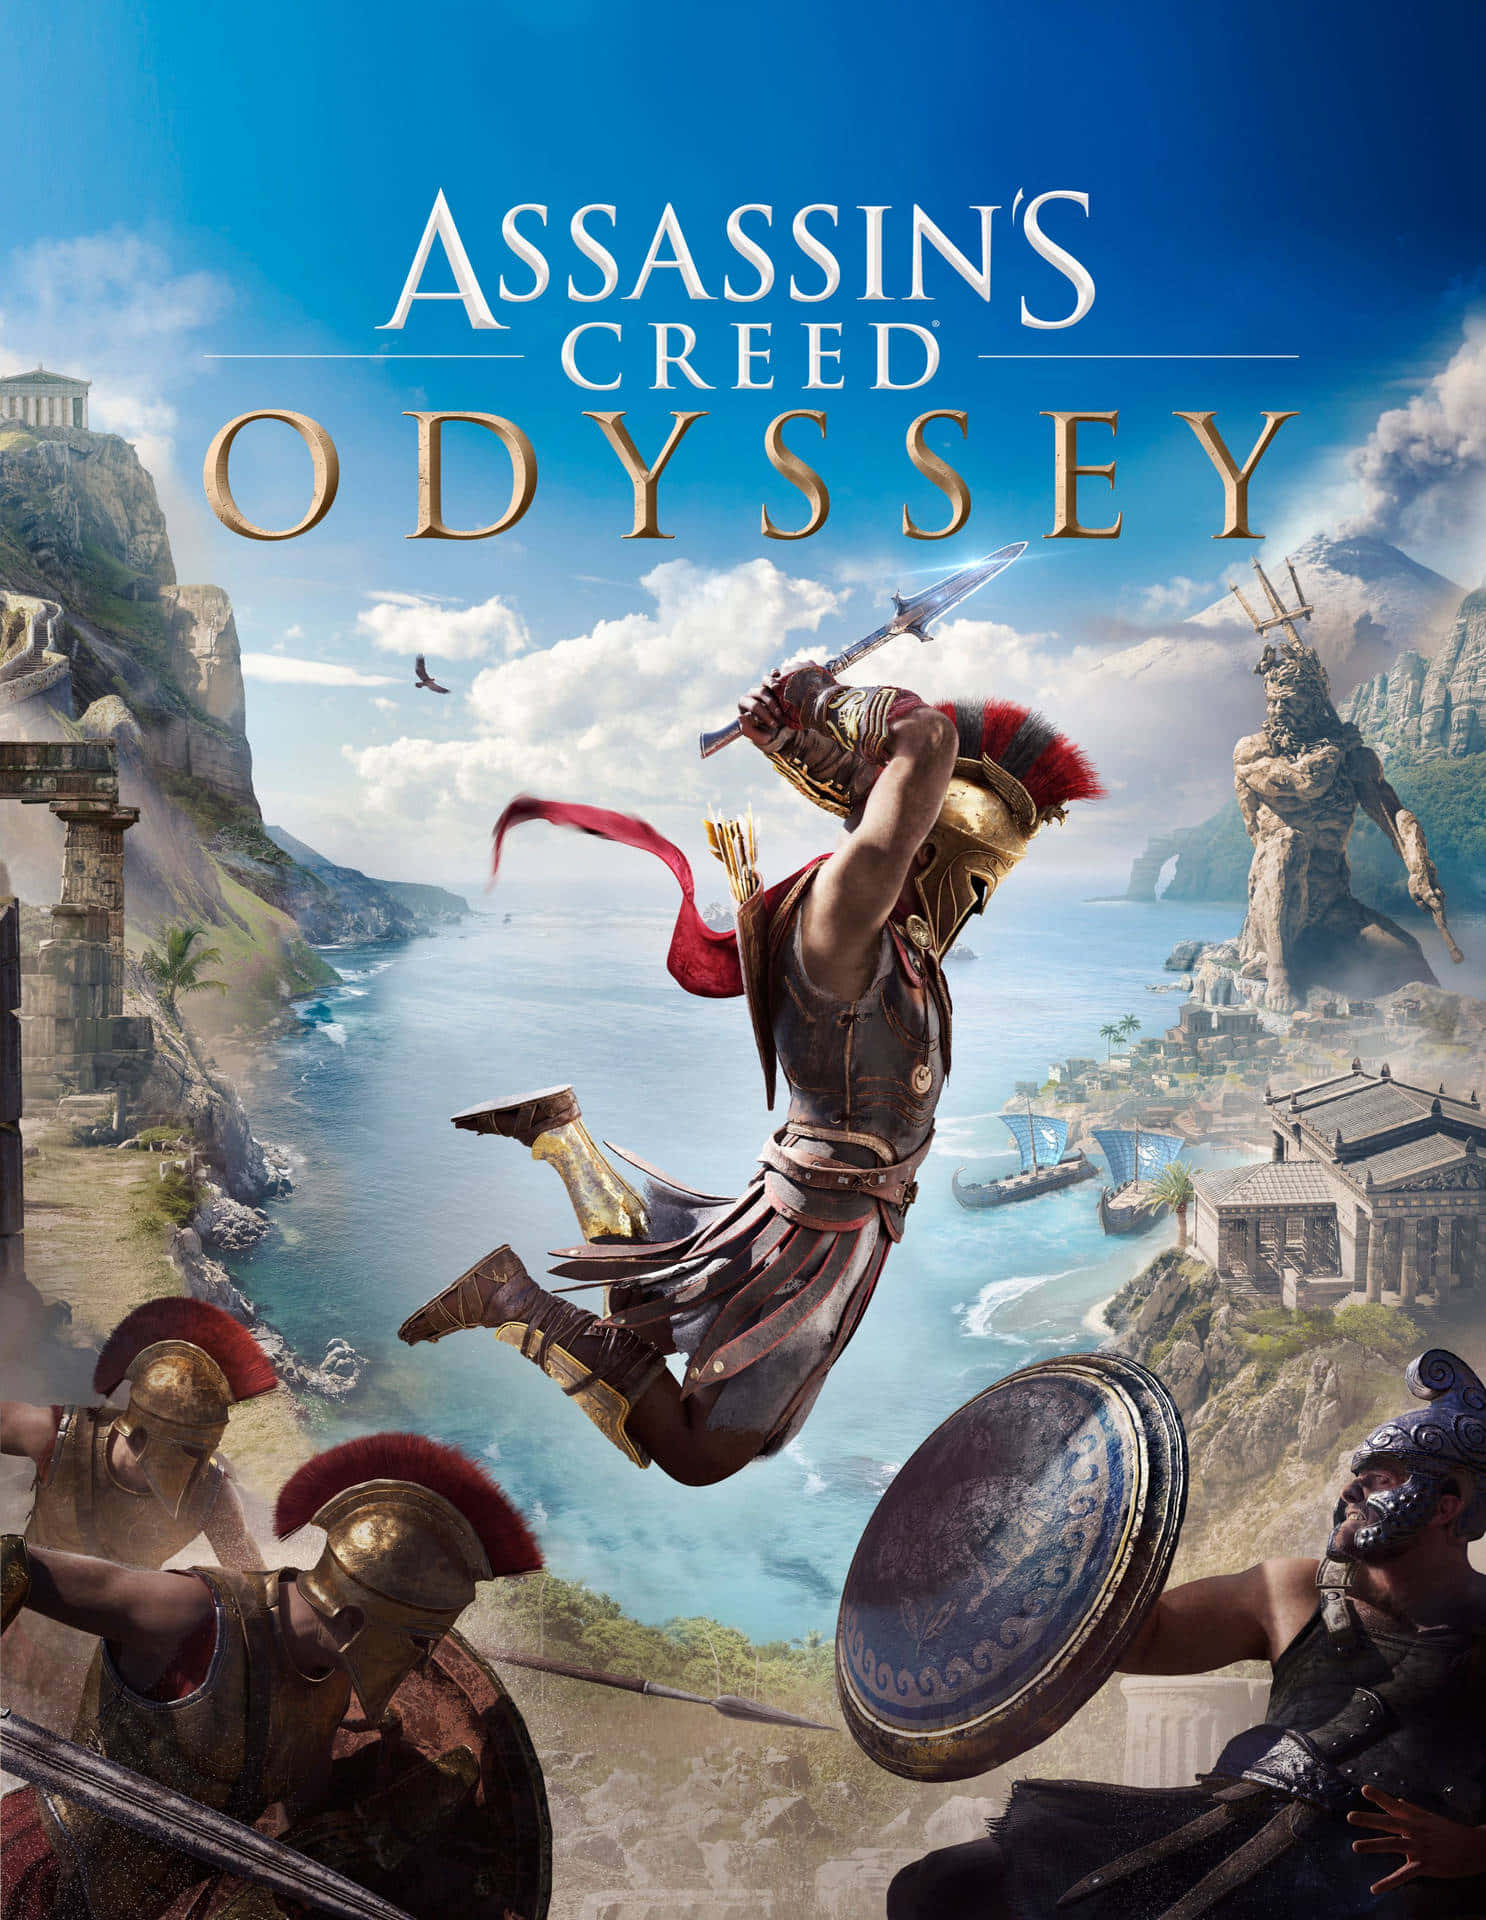 Assassin's Creed Odyssey Background Jumping Soldier